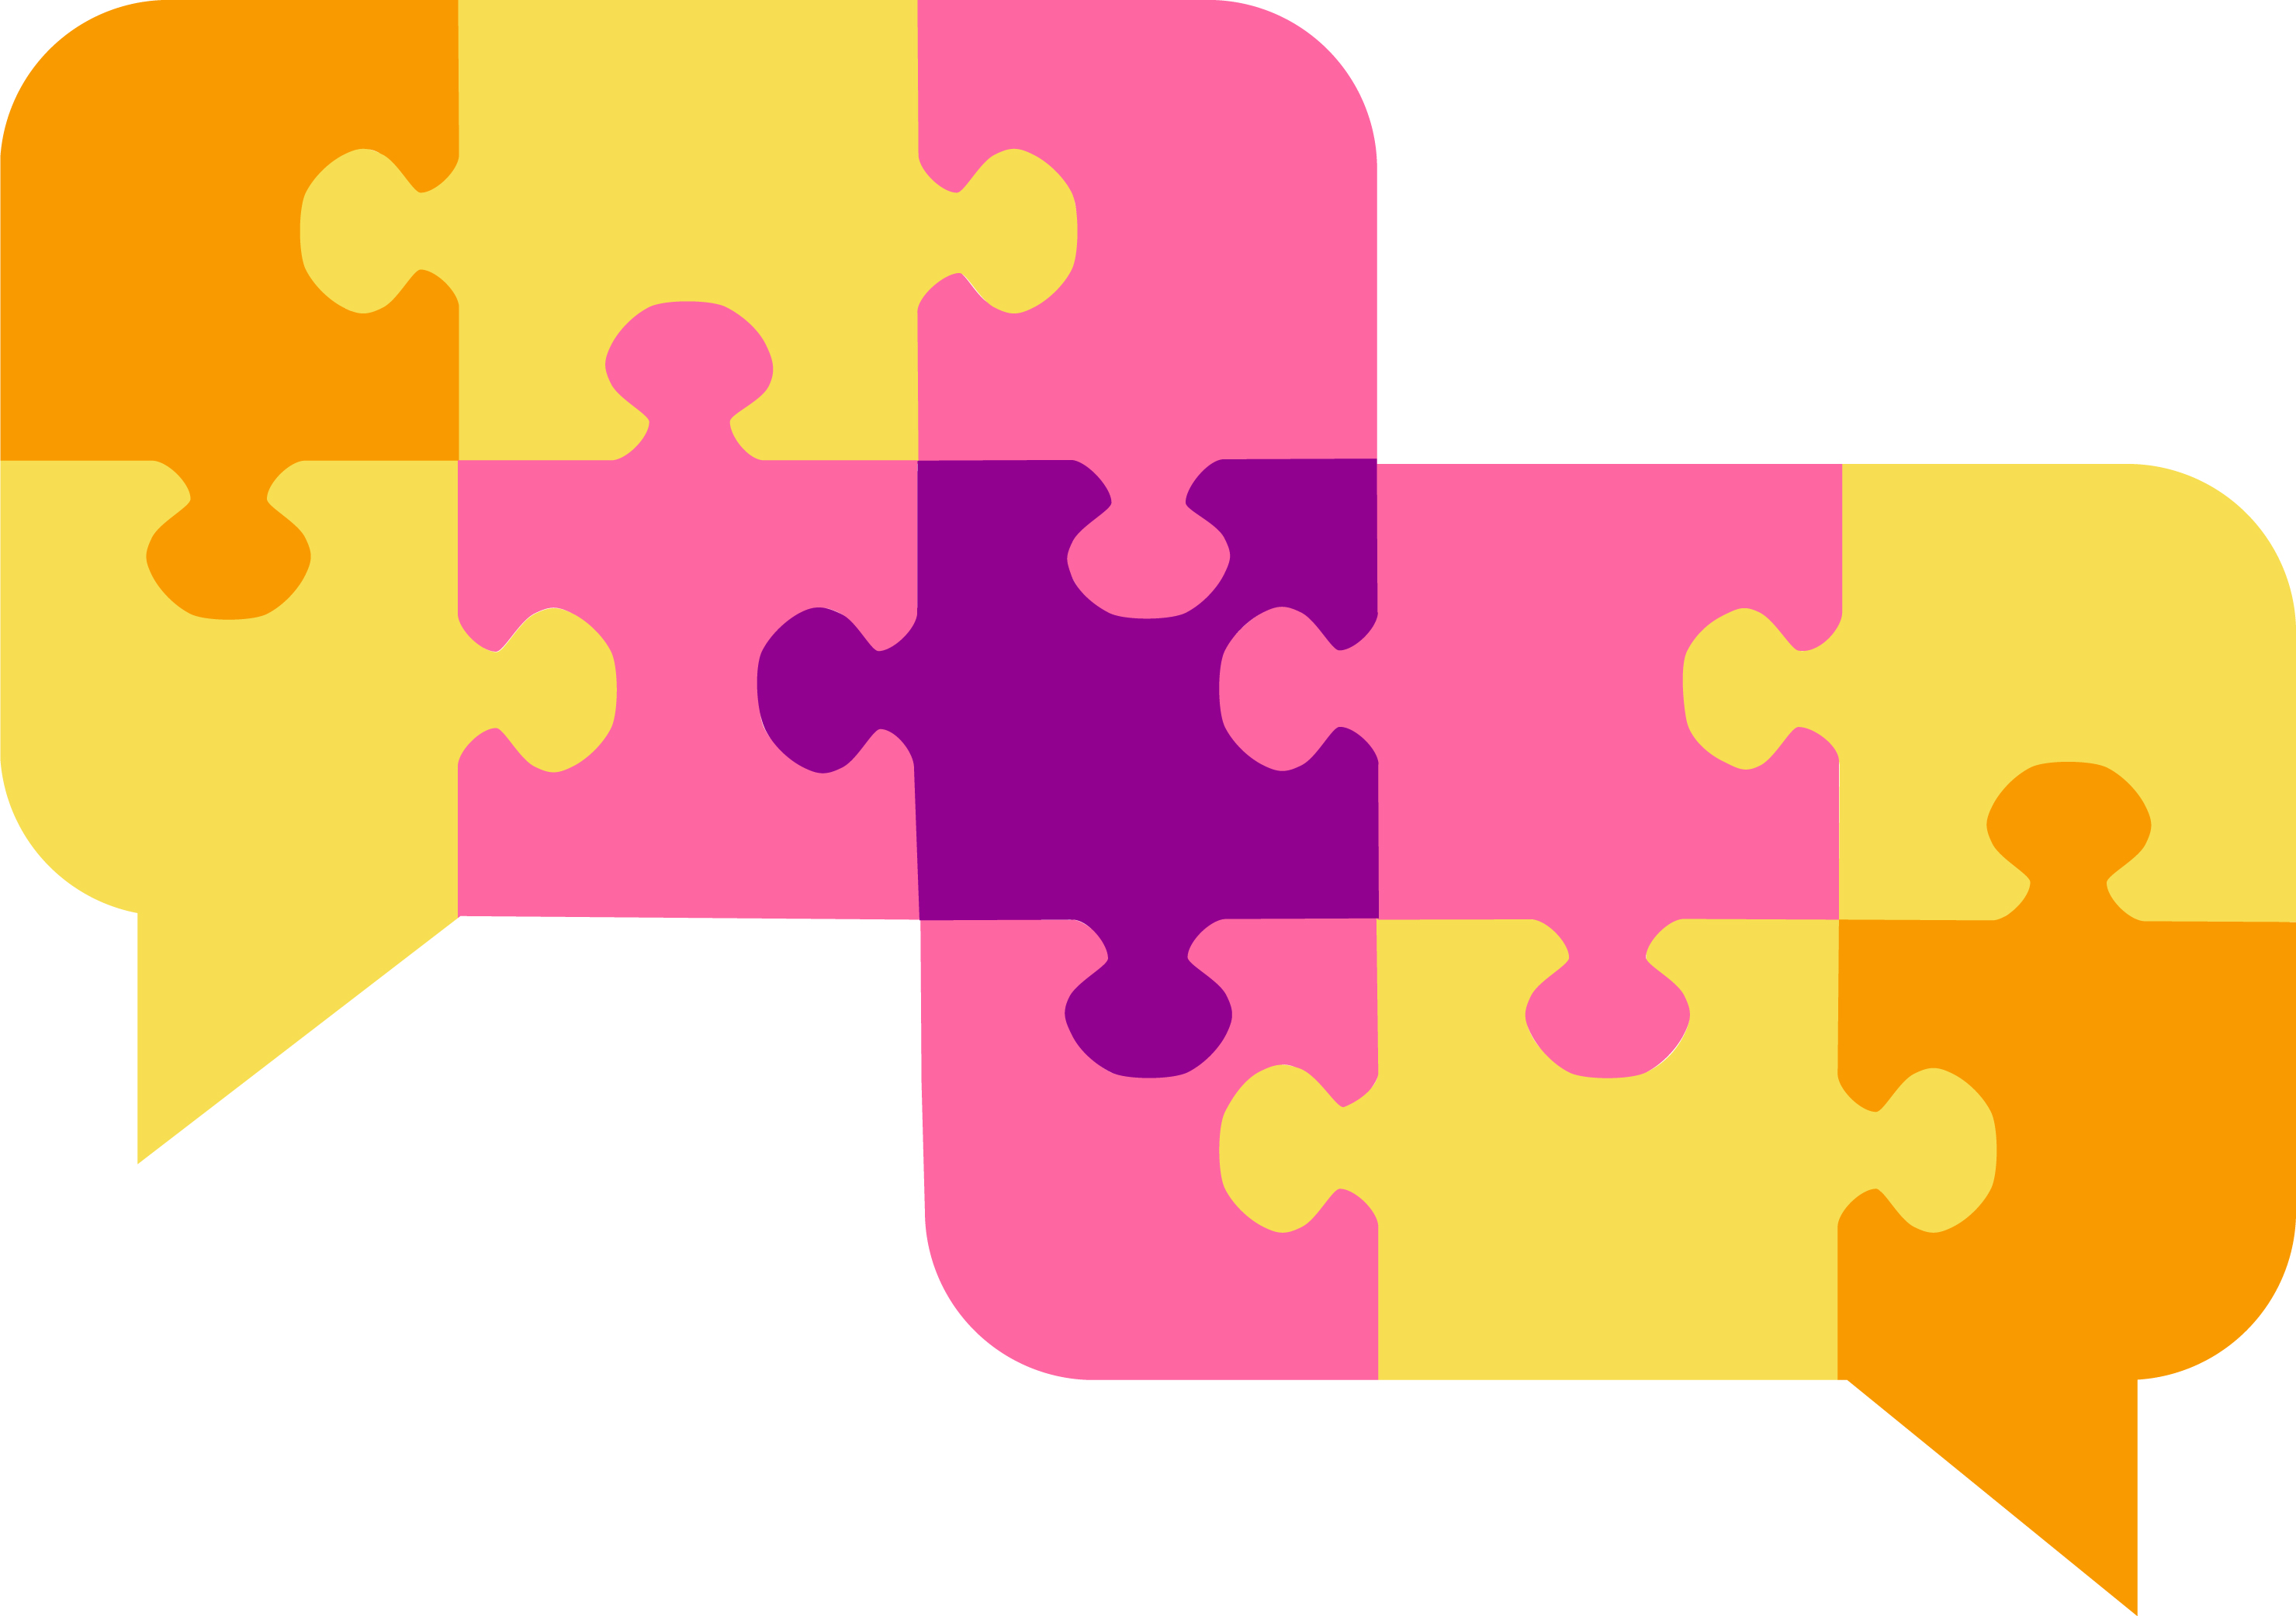 Puzzle pieces put together to form two speech bubbles